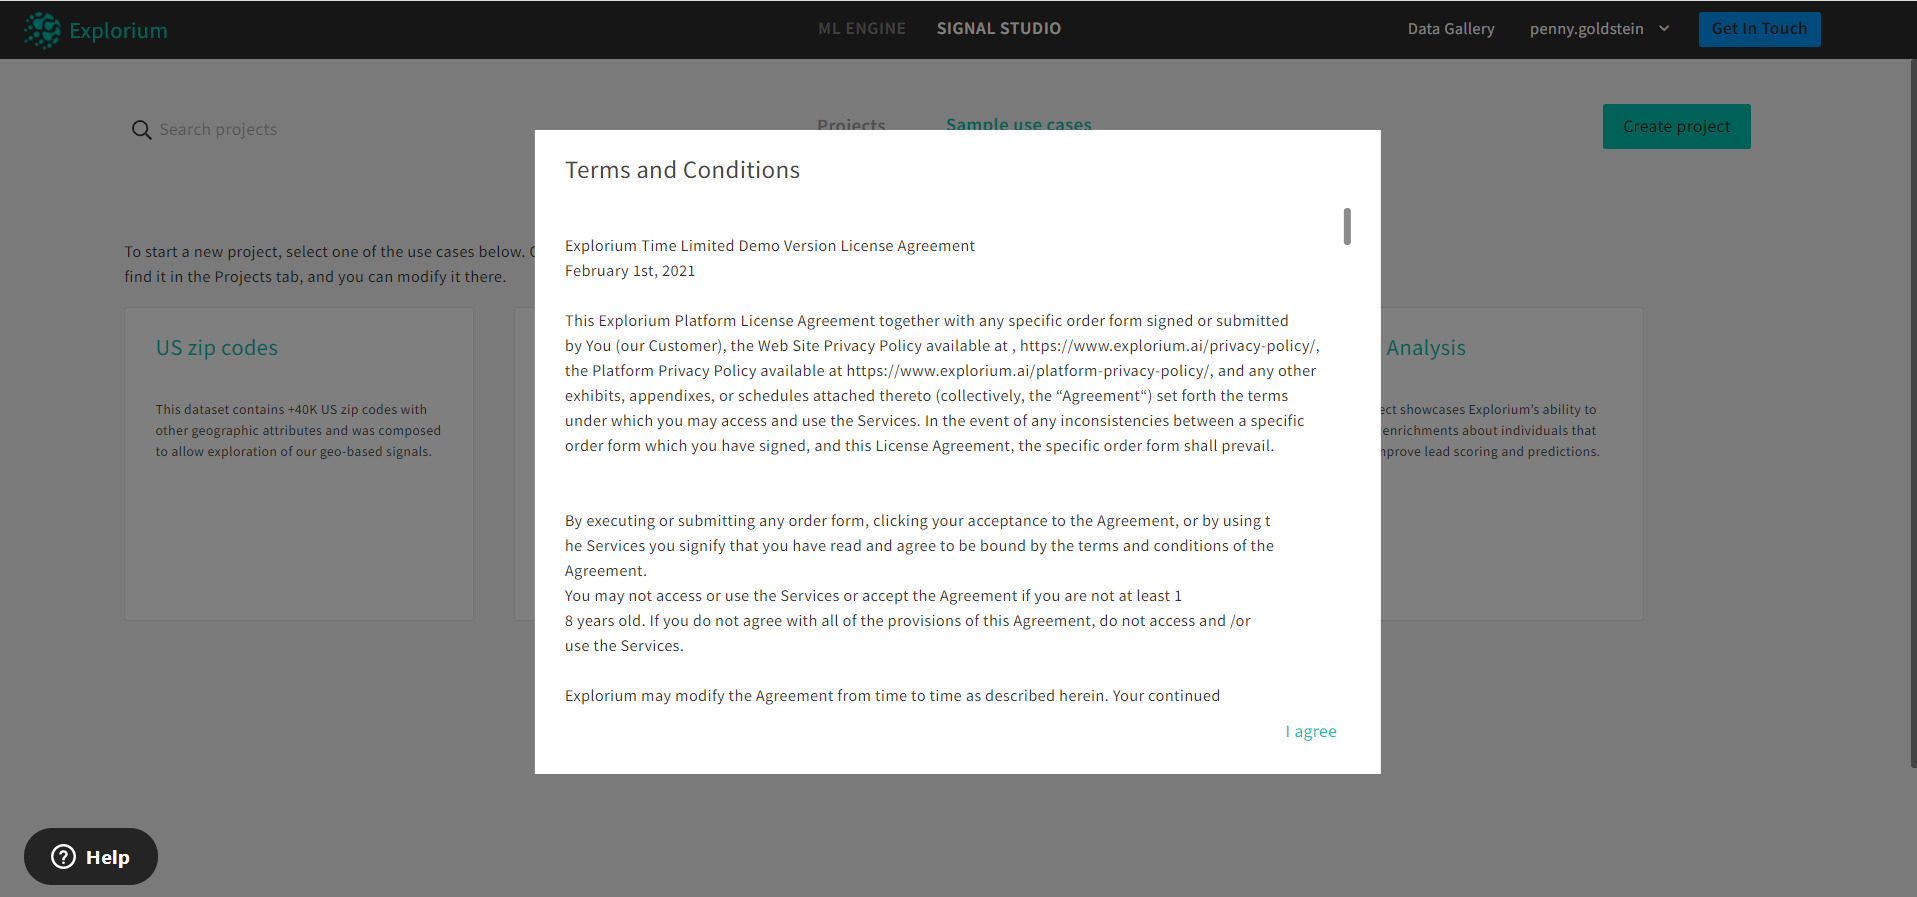 Terms and Conditions.png